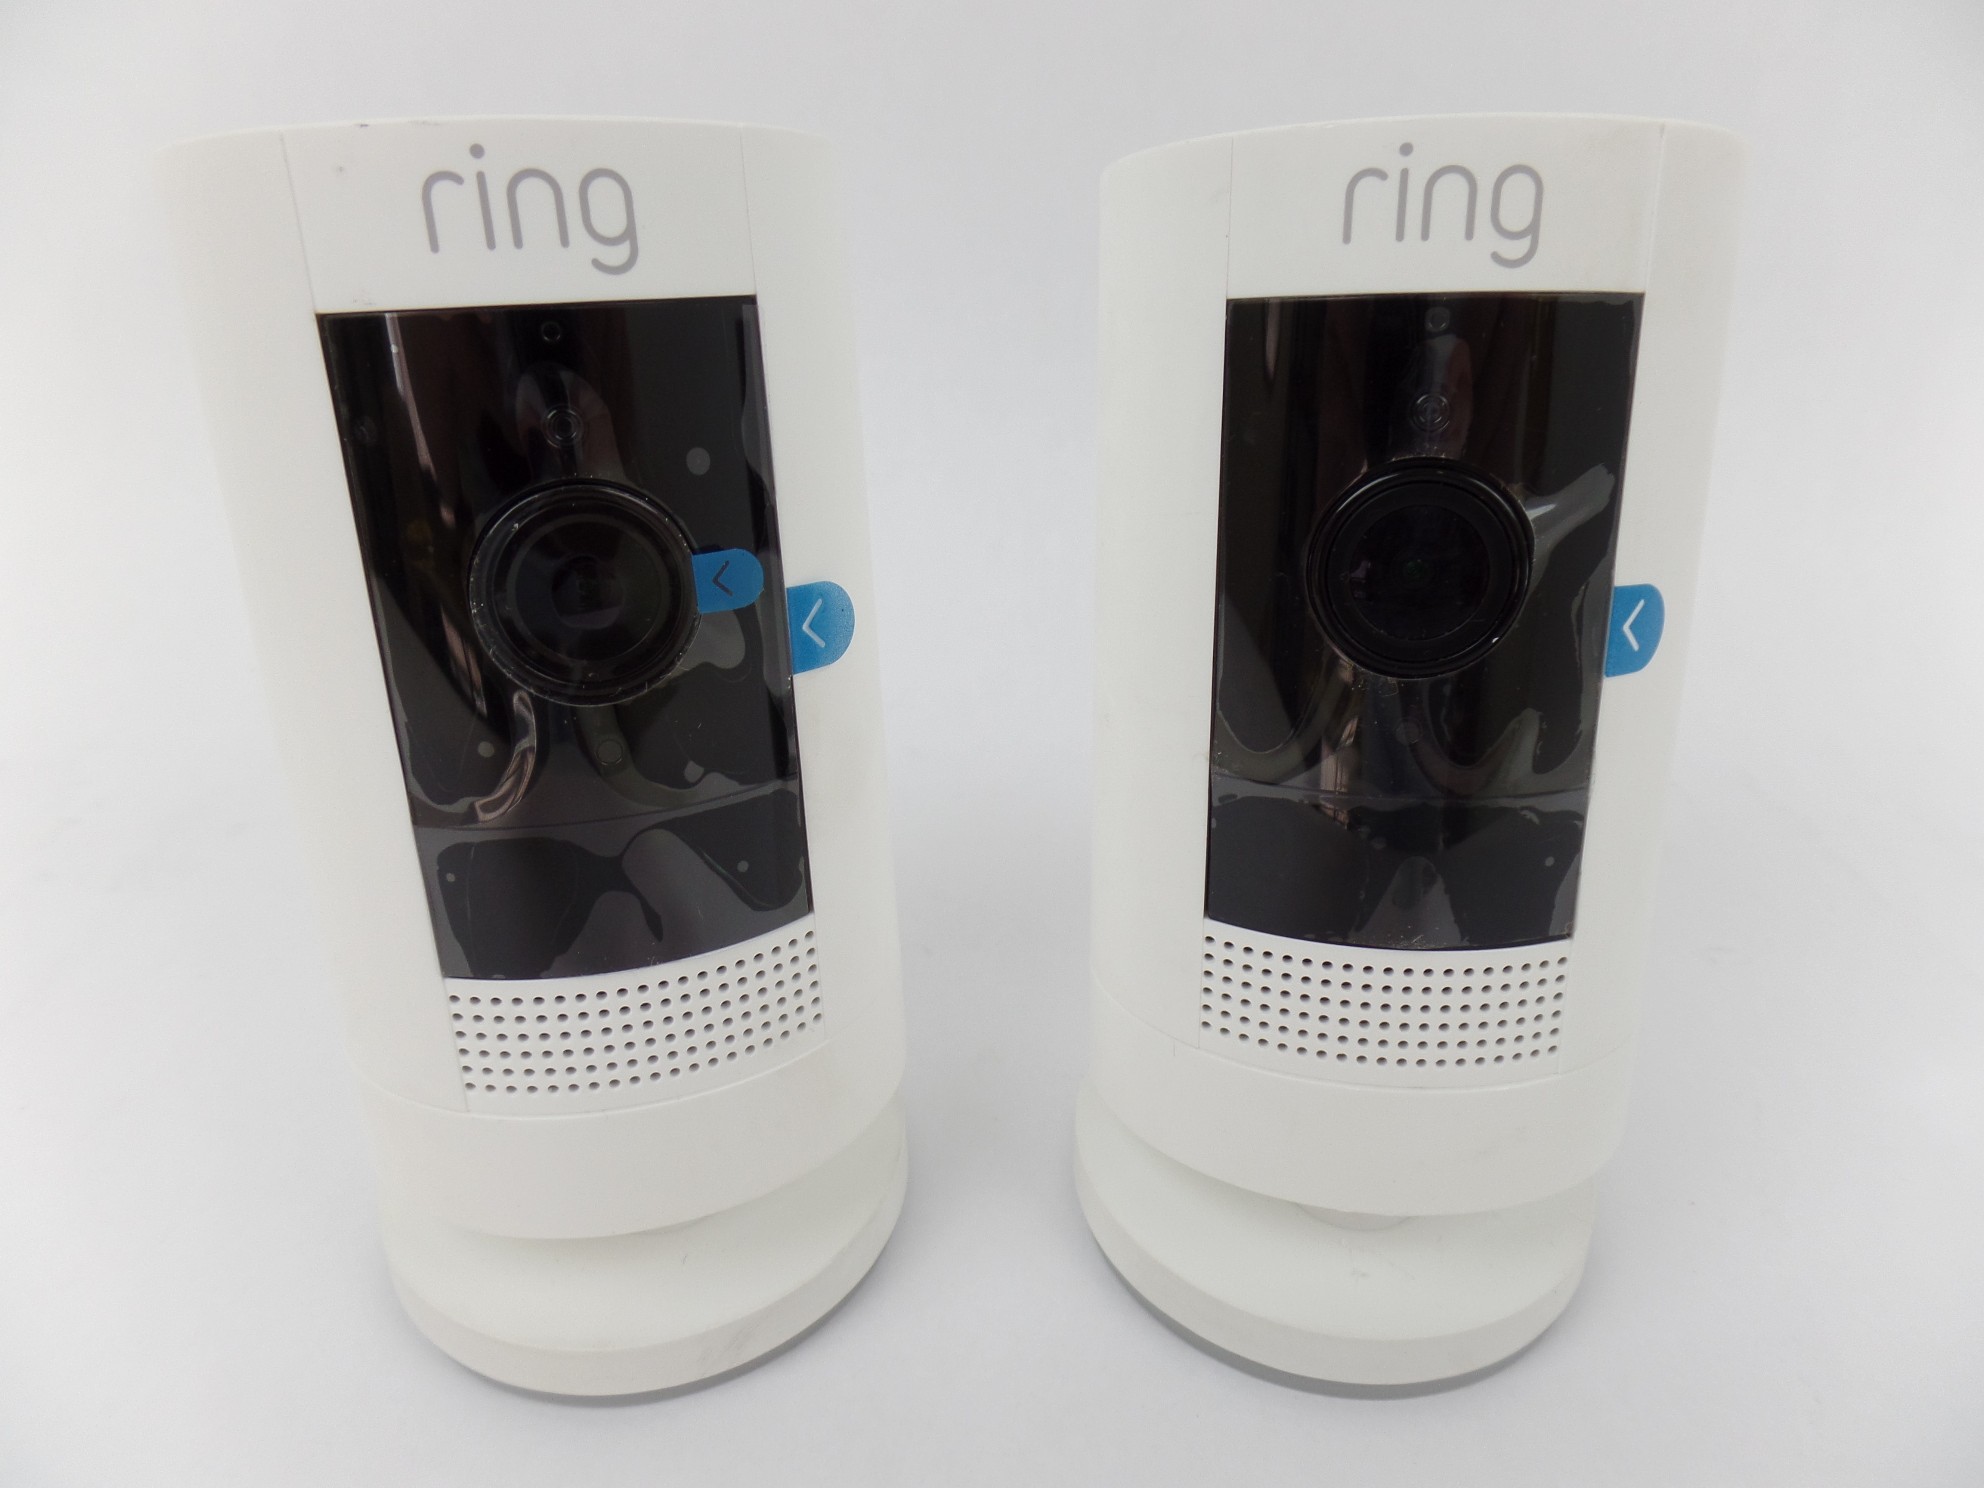 Lot of 2 Dummy Ring Stick Up Cam Indoor/Outdoor Fake Security Camera